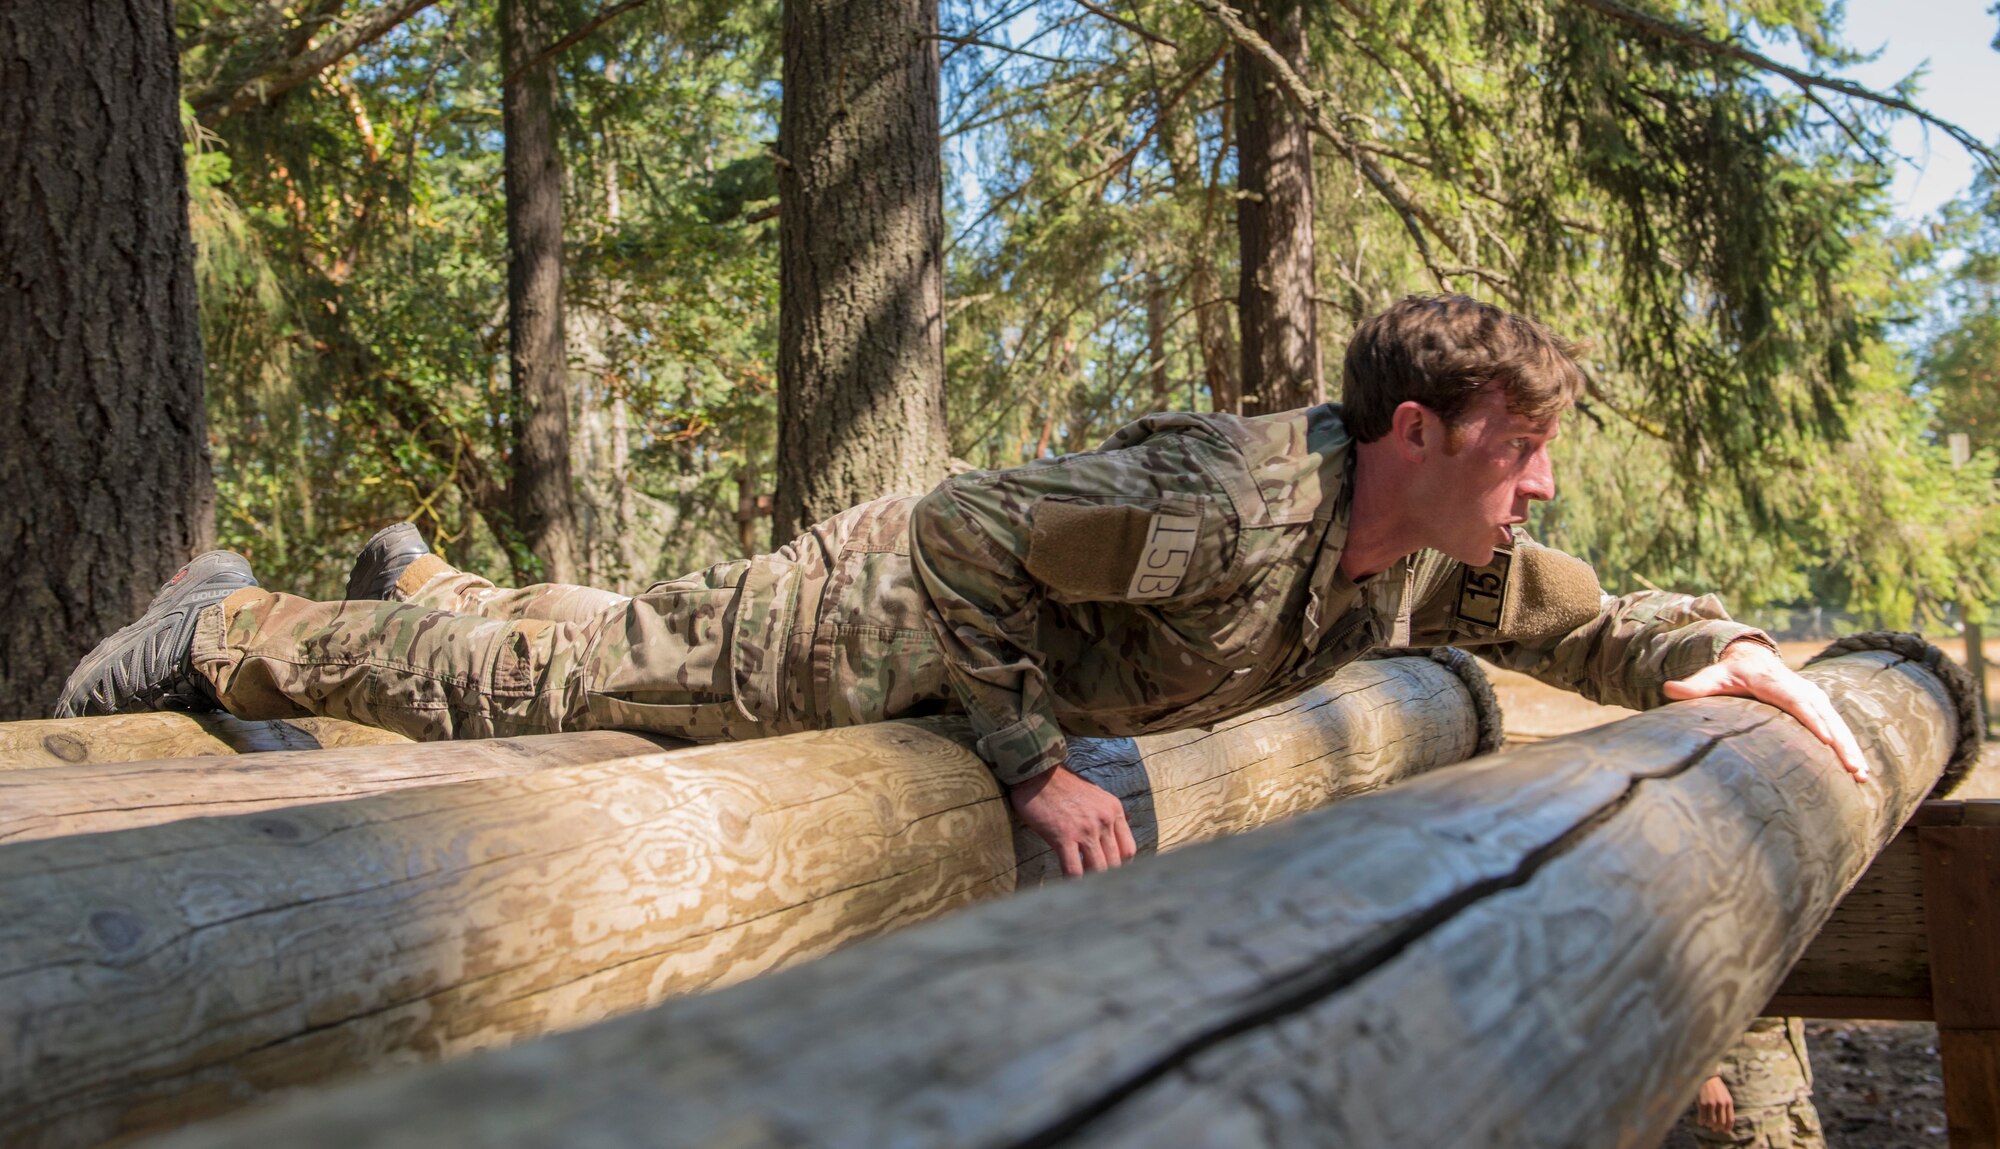 A U.S. Air Force Tactical Air Control Party (TACP) Airman assigned to the 116th Air Support Operations Squadron, Camp Murray, Wash., crawls across rolling logs during the 2019 Lightning Challenge at Joint Base Lewis-McChord, Wash., July 29, 2019.